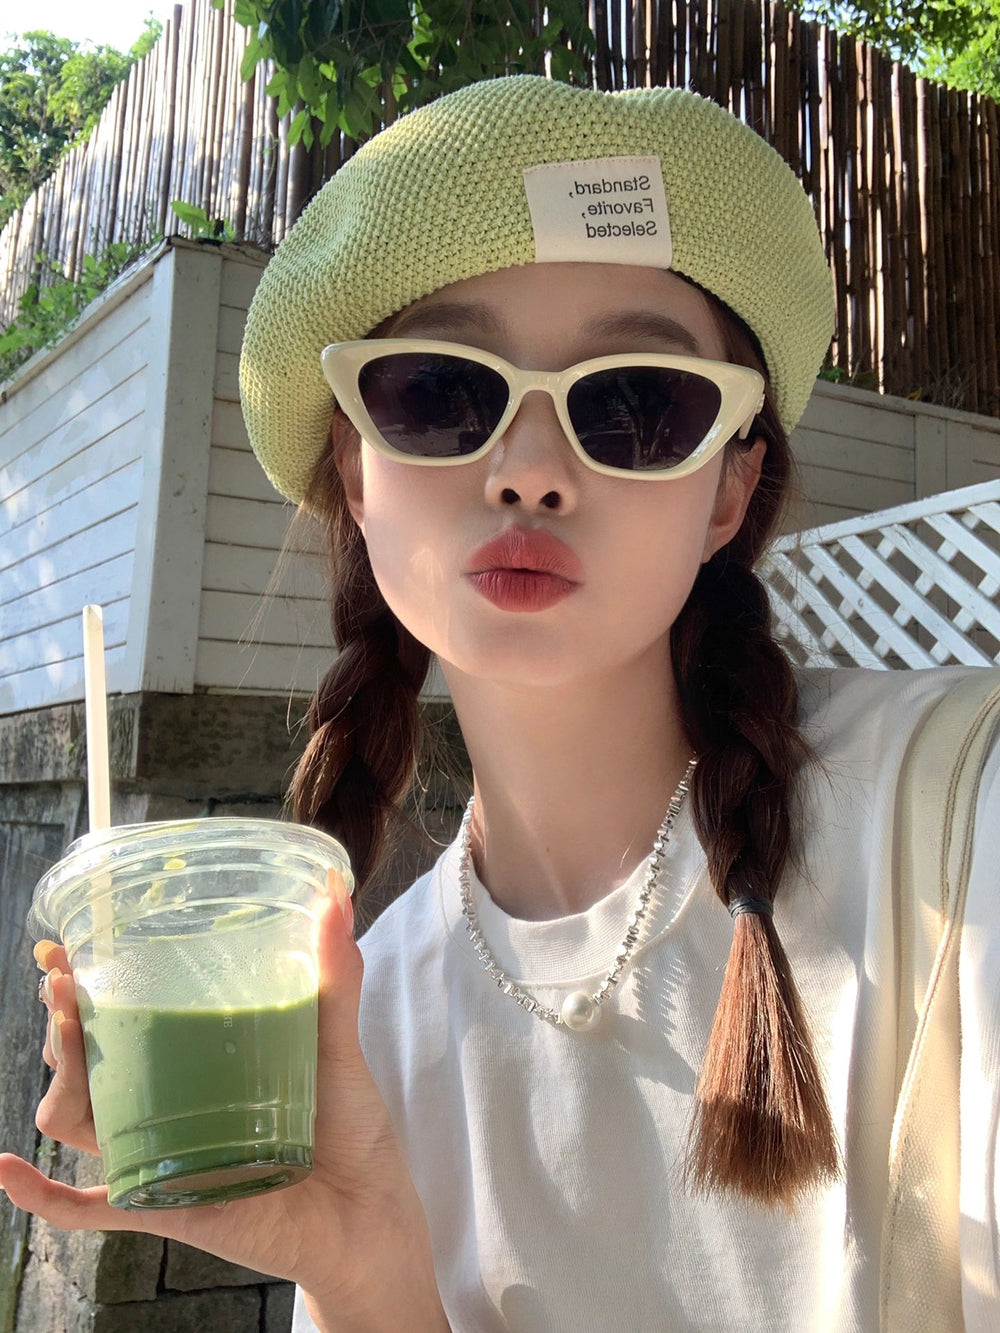 An elegant woman, adorned with a trendy hat and fashionable sunglasses, gracefully clutches a vibrant green drink.